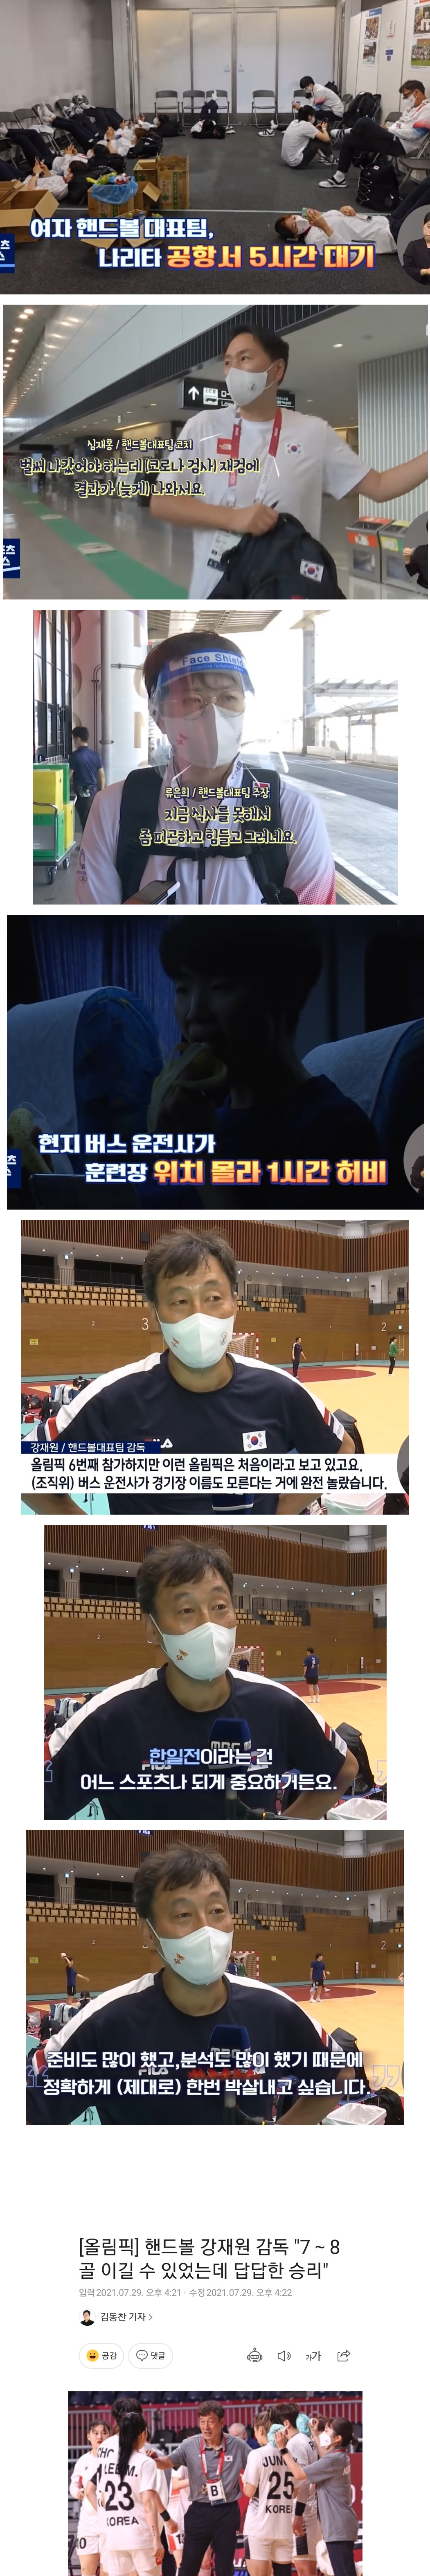 Coach who is not happy after winning the Tokyo Olympics match against Korea...gif